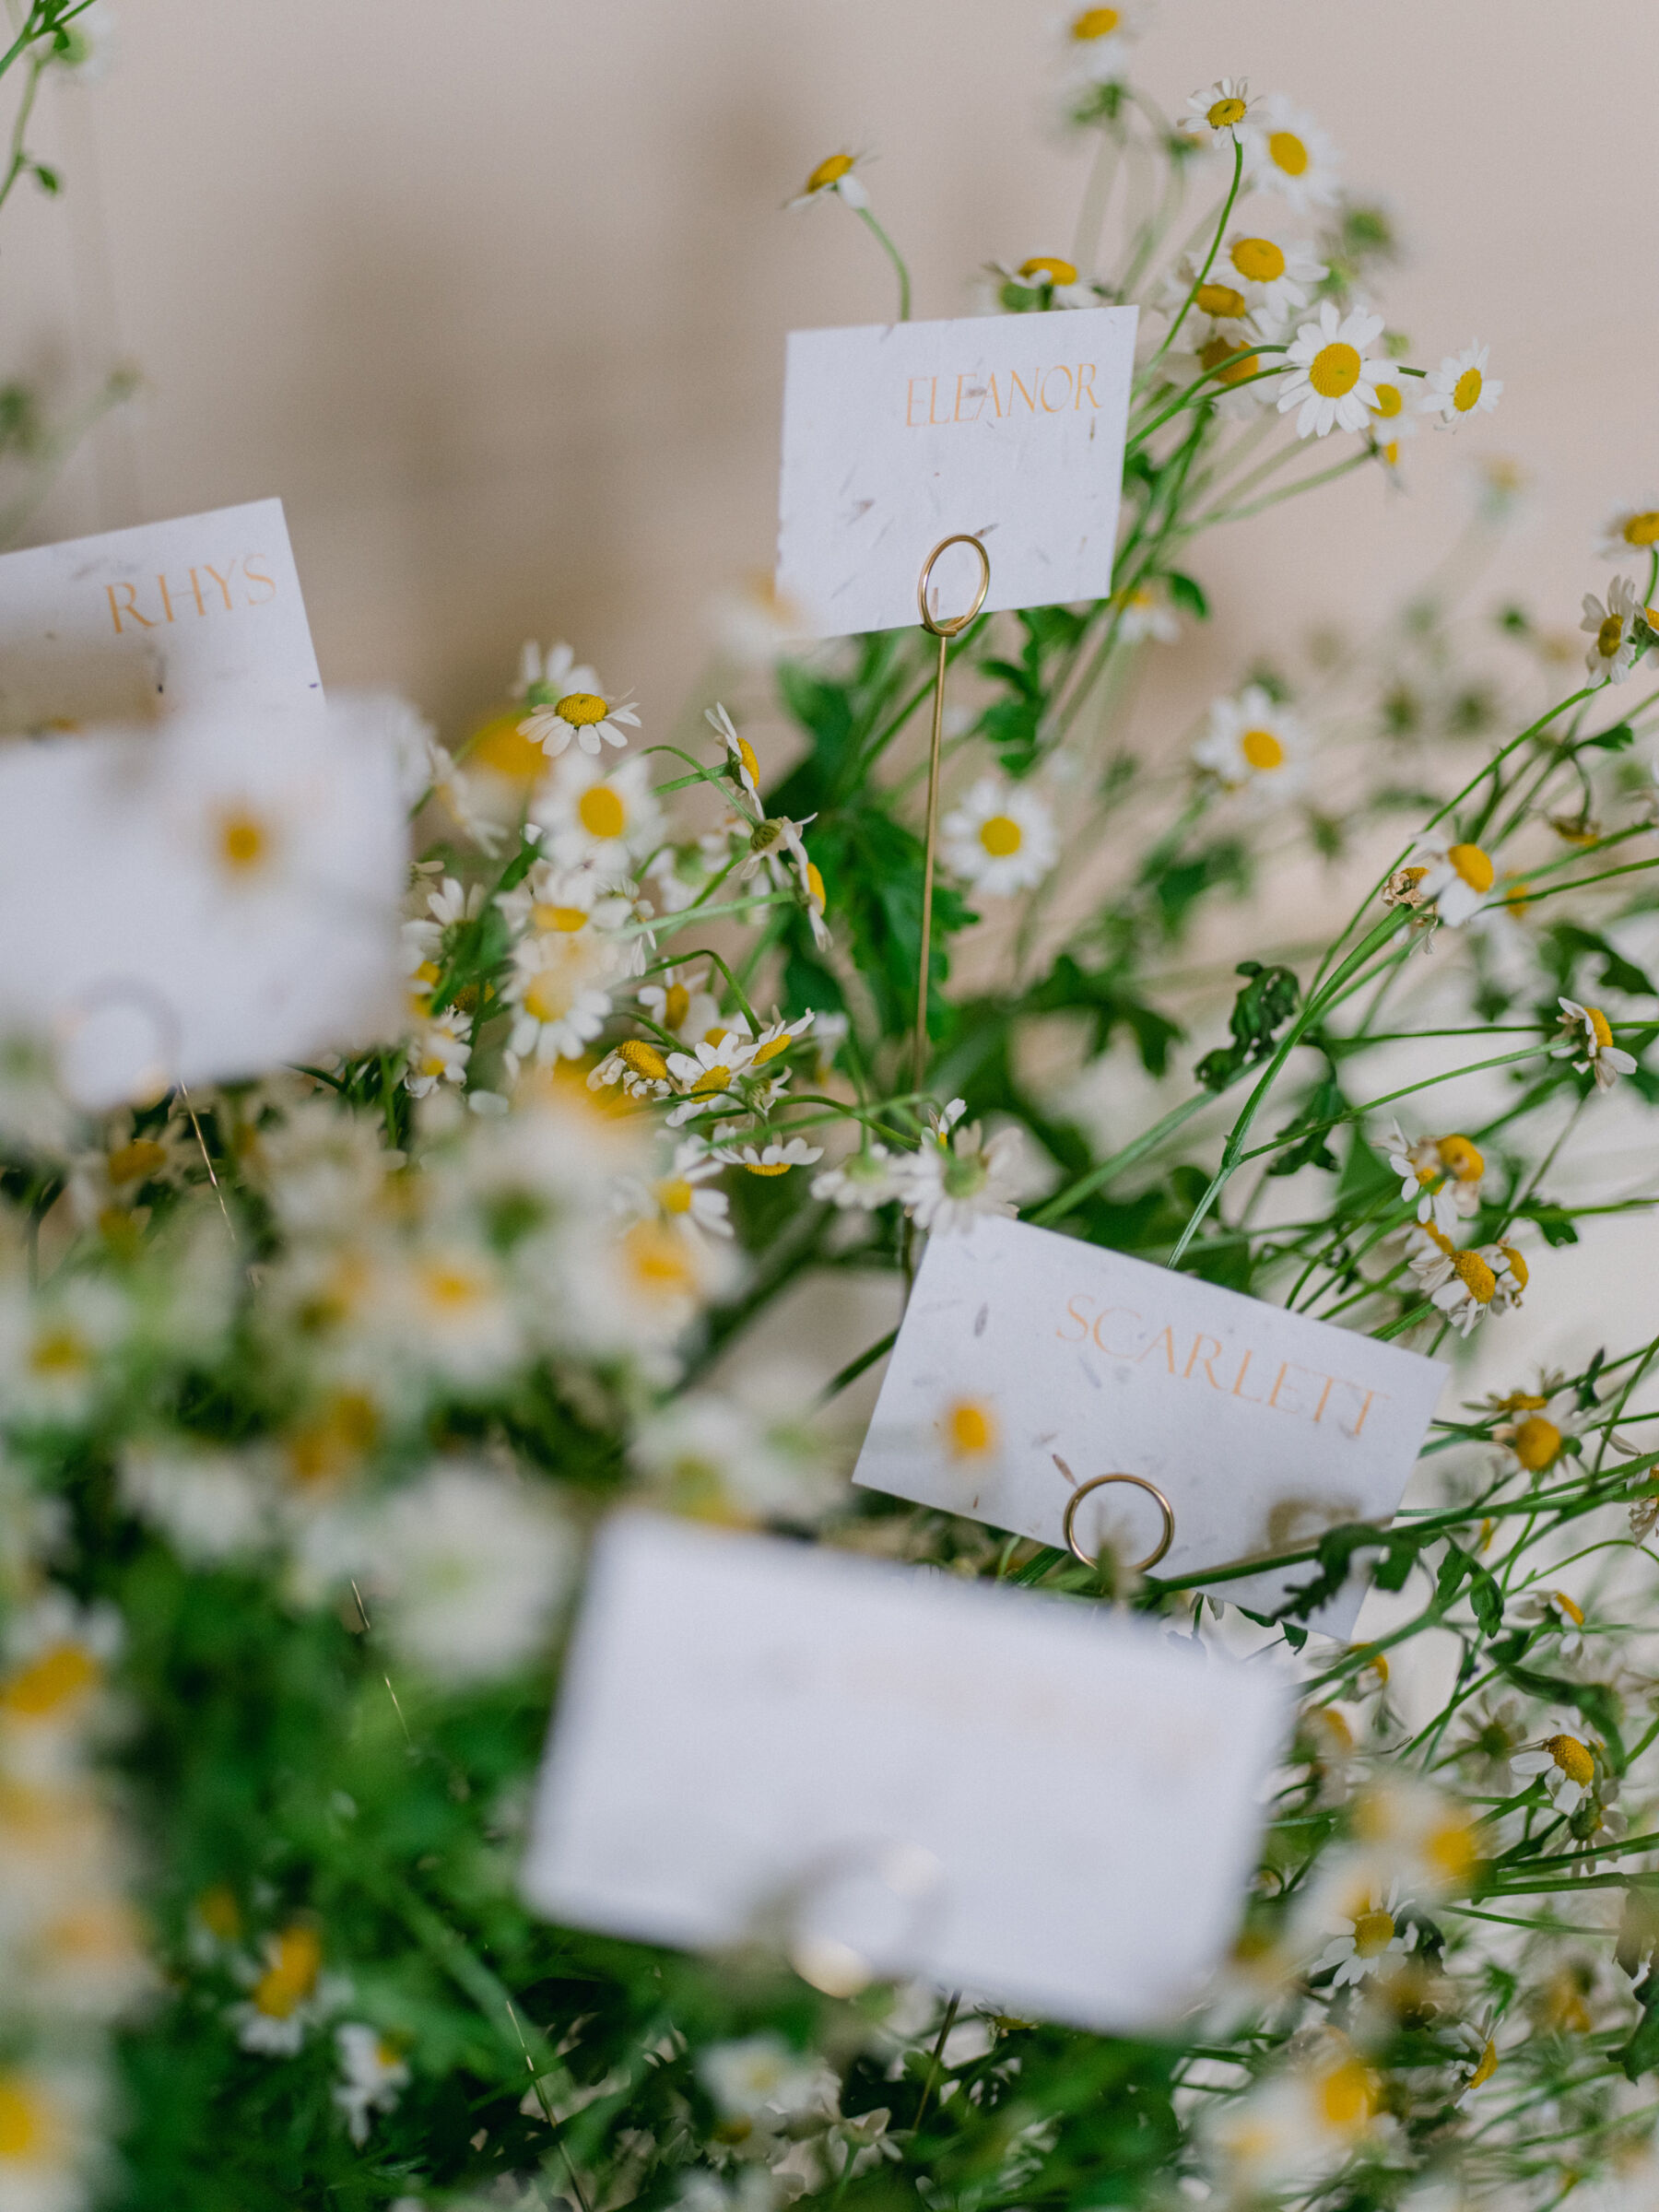 Chamomile daisies holding wedding place cards.